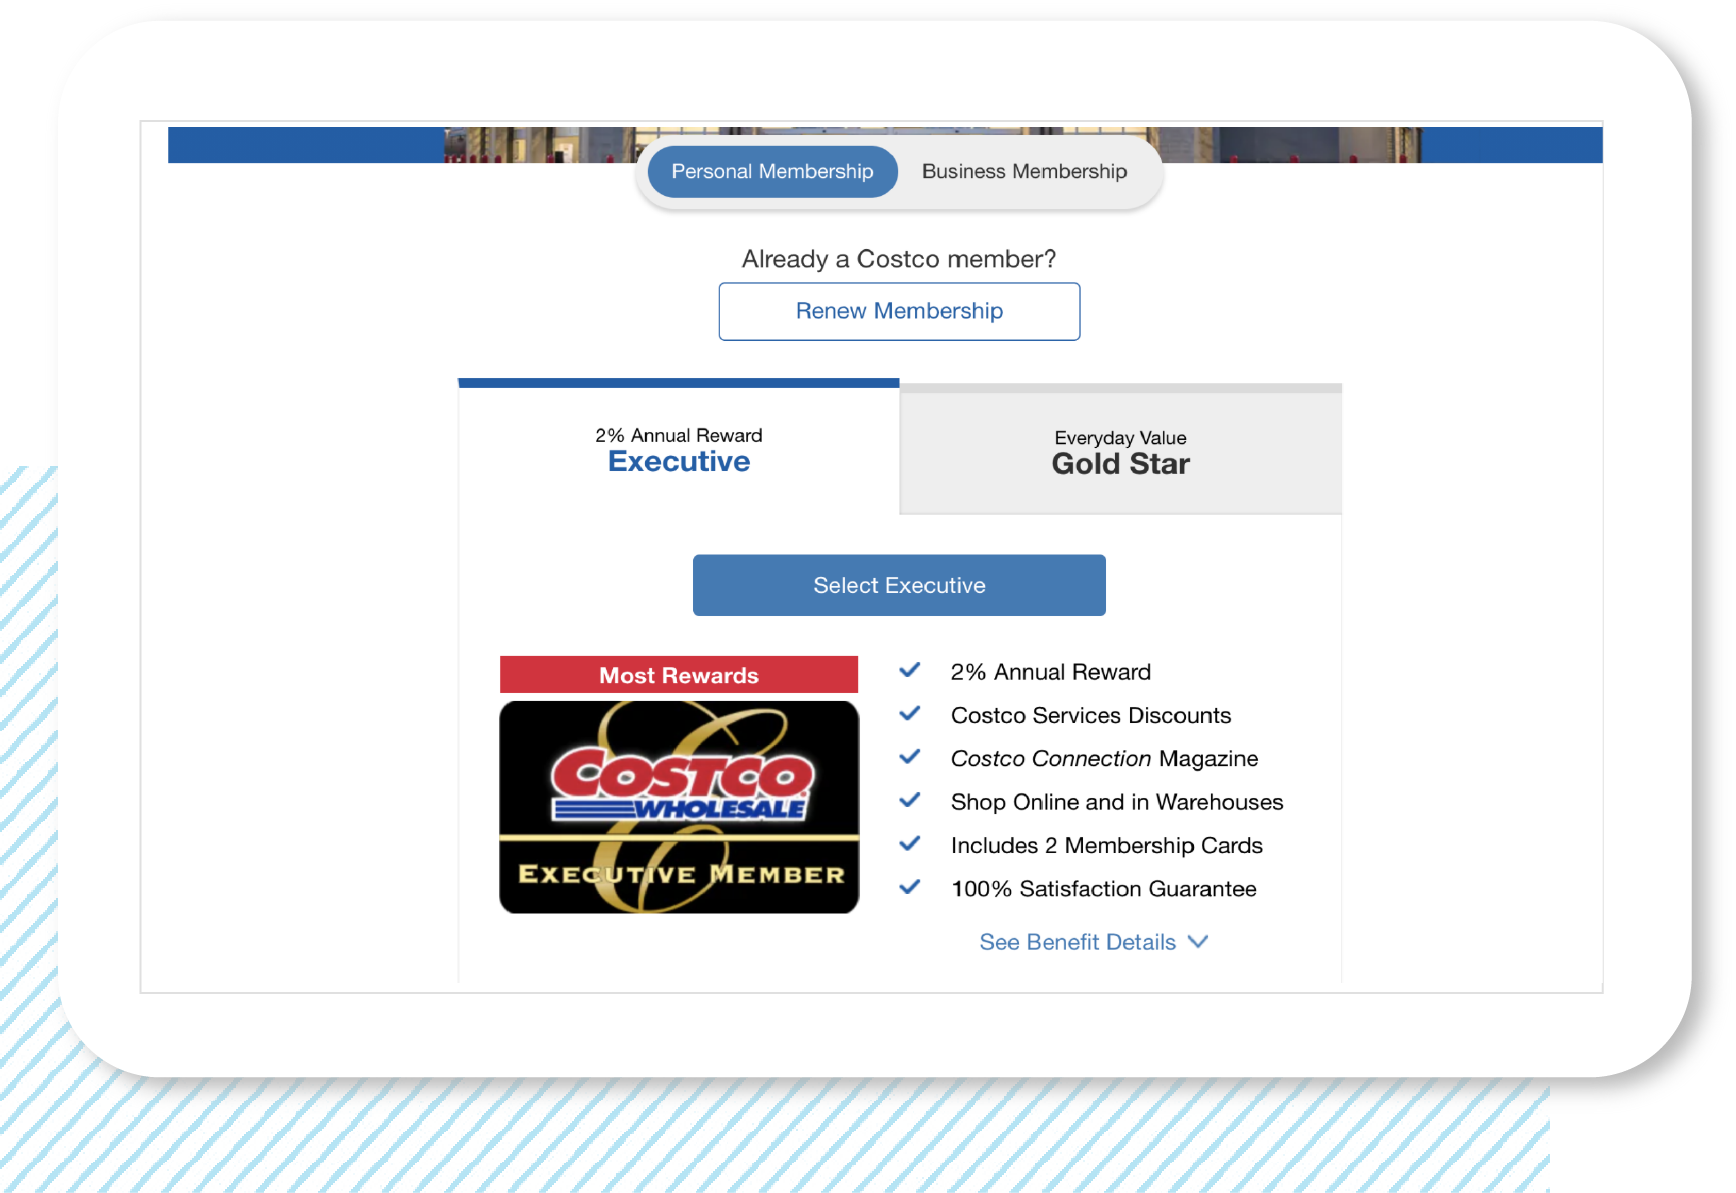 Costco is an example of a membership subscription program.